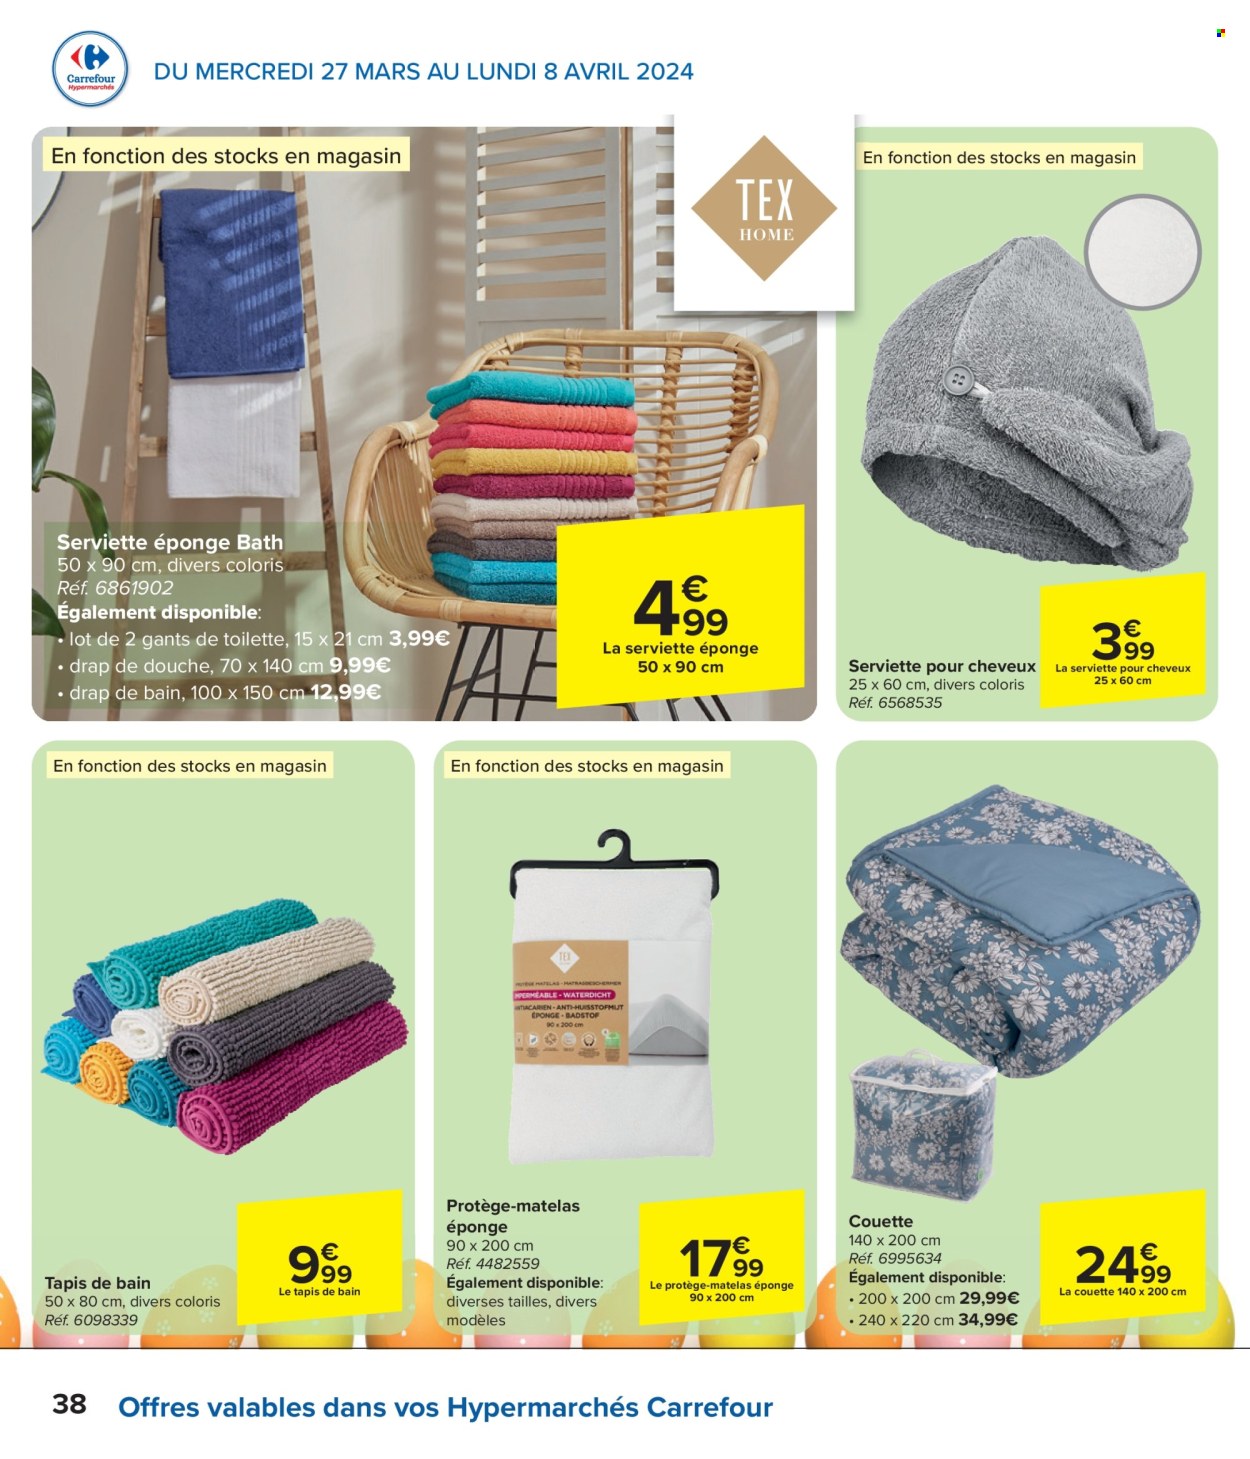 Catalogue Carrefour hypermarkt - 27.3.2024 - 8.4.2024. Page 38.